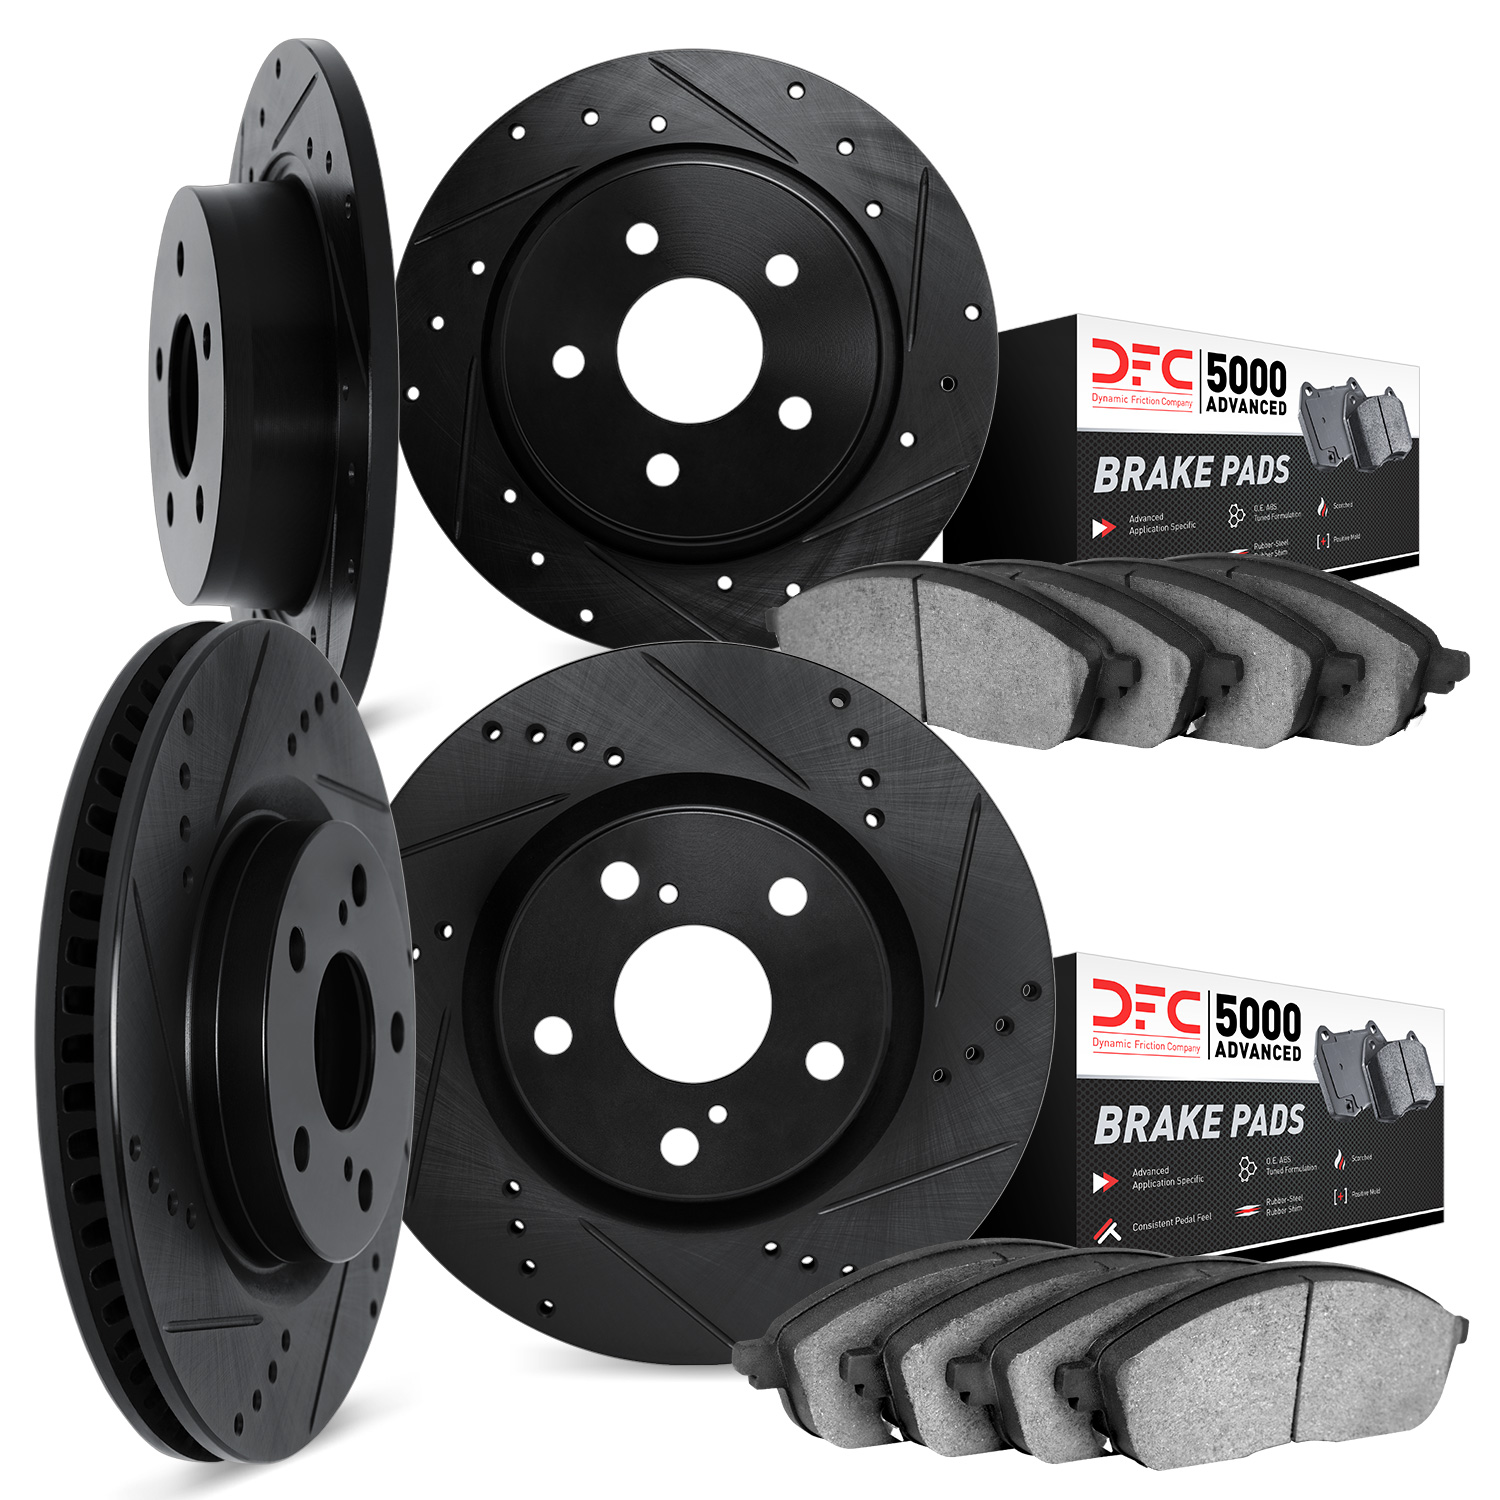 8504-74066 Drilled/Slotted Brake Rotors w/5000 Advanced Brake Pads Kit [Black], 2005-2013 Audi/Volkswagen, Position: Front and R